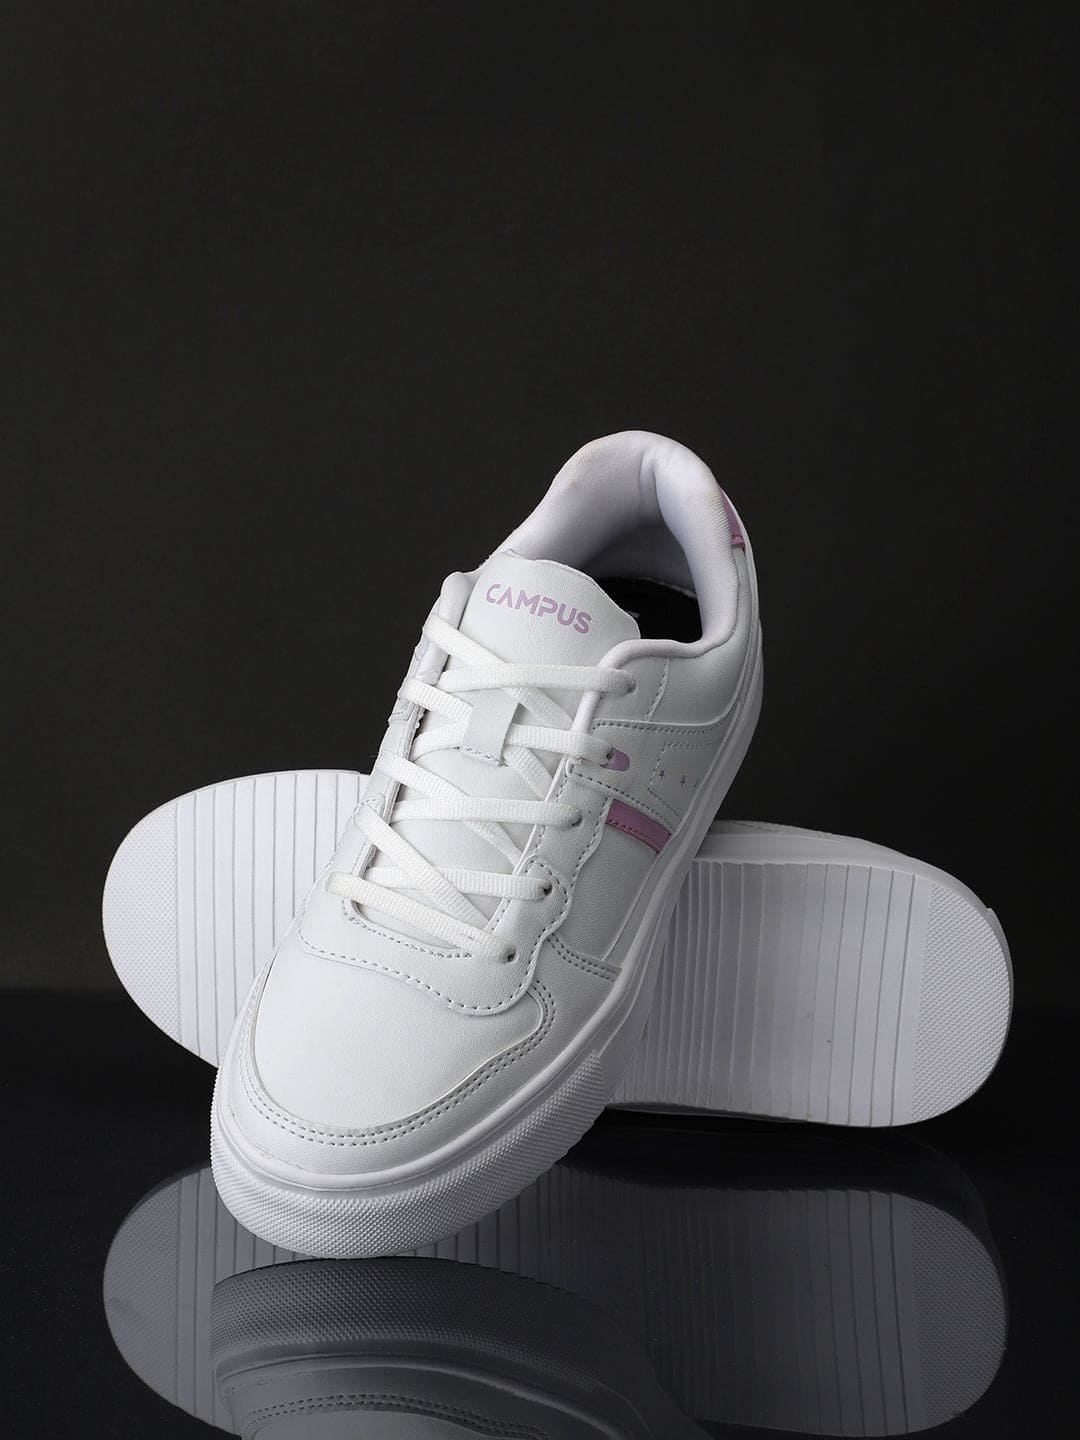 Amazon.com: CADIDL Cheer Shoes Women Cheerleading Dance Shoes Tennis  Athletic Flats Walking Sneakers for Girls White 5 (M) US : Clothing, Shoes  & Jewelry